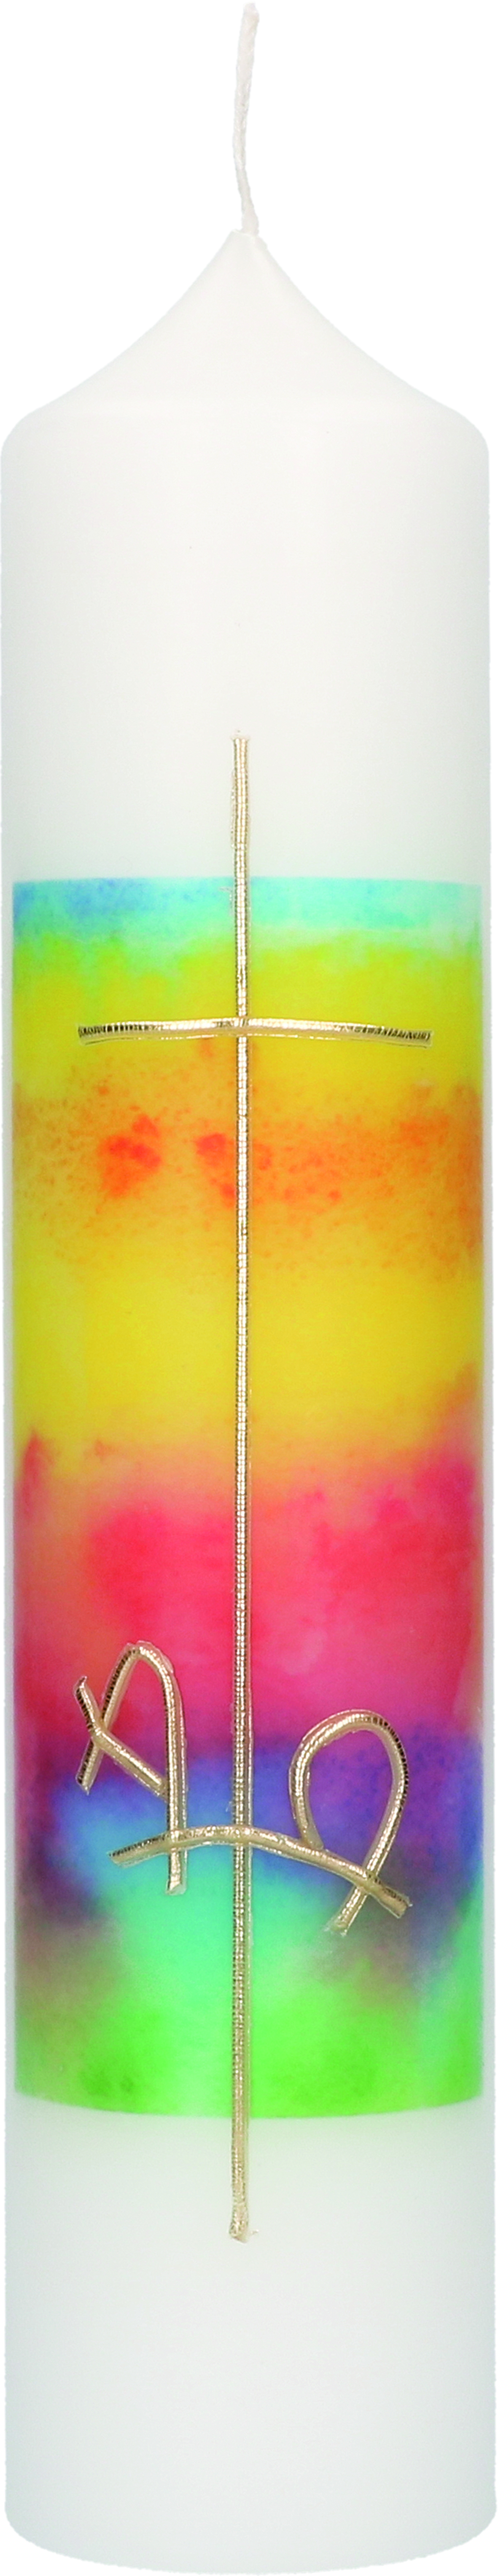 Baptism Candle with Print & Applied Wax Motif Rainbow Cross